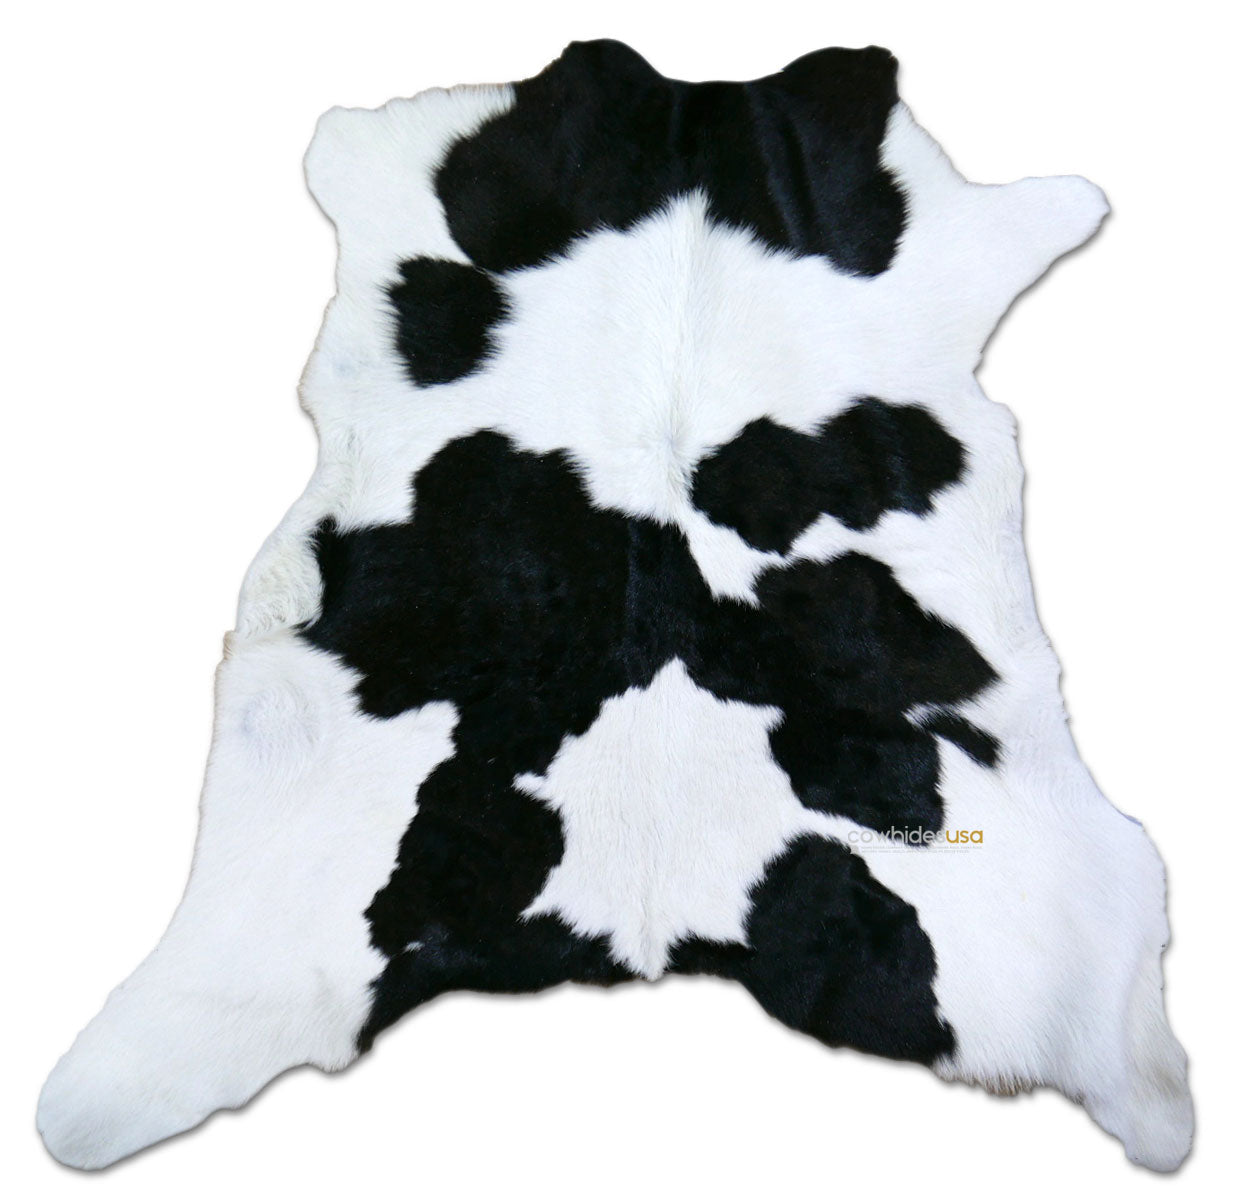 Black and White Calfskin Size: 36"X 29" Long Haired Black and White Calf Skin Mini Cowhide Rug